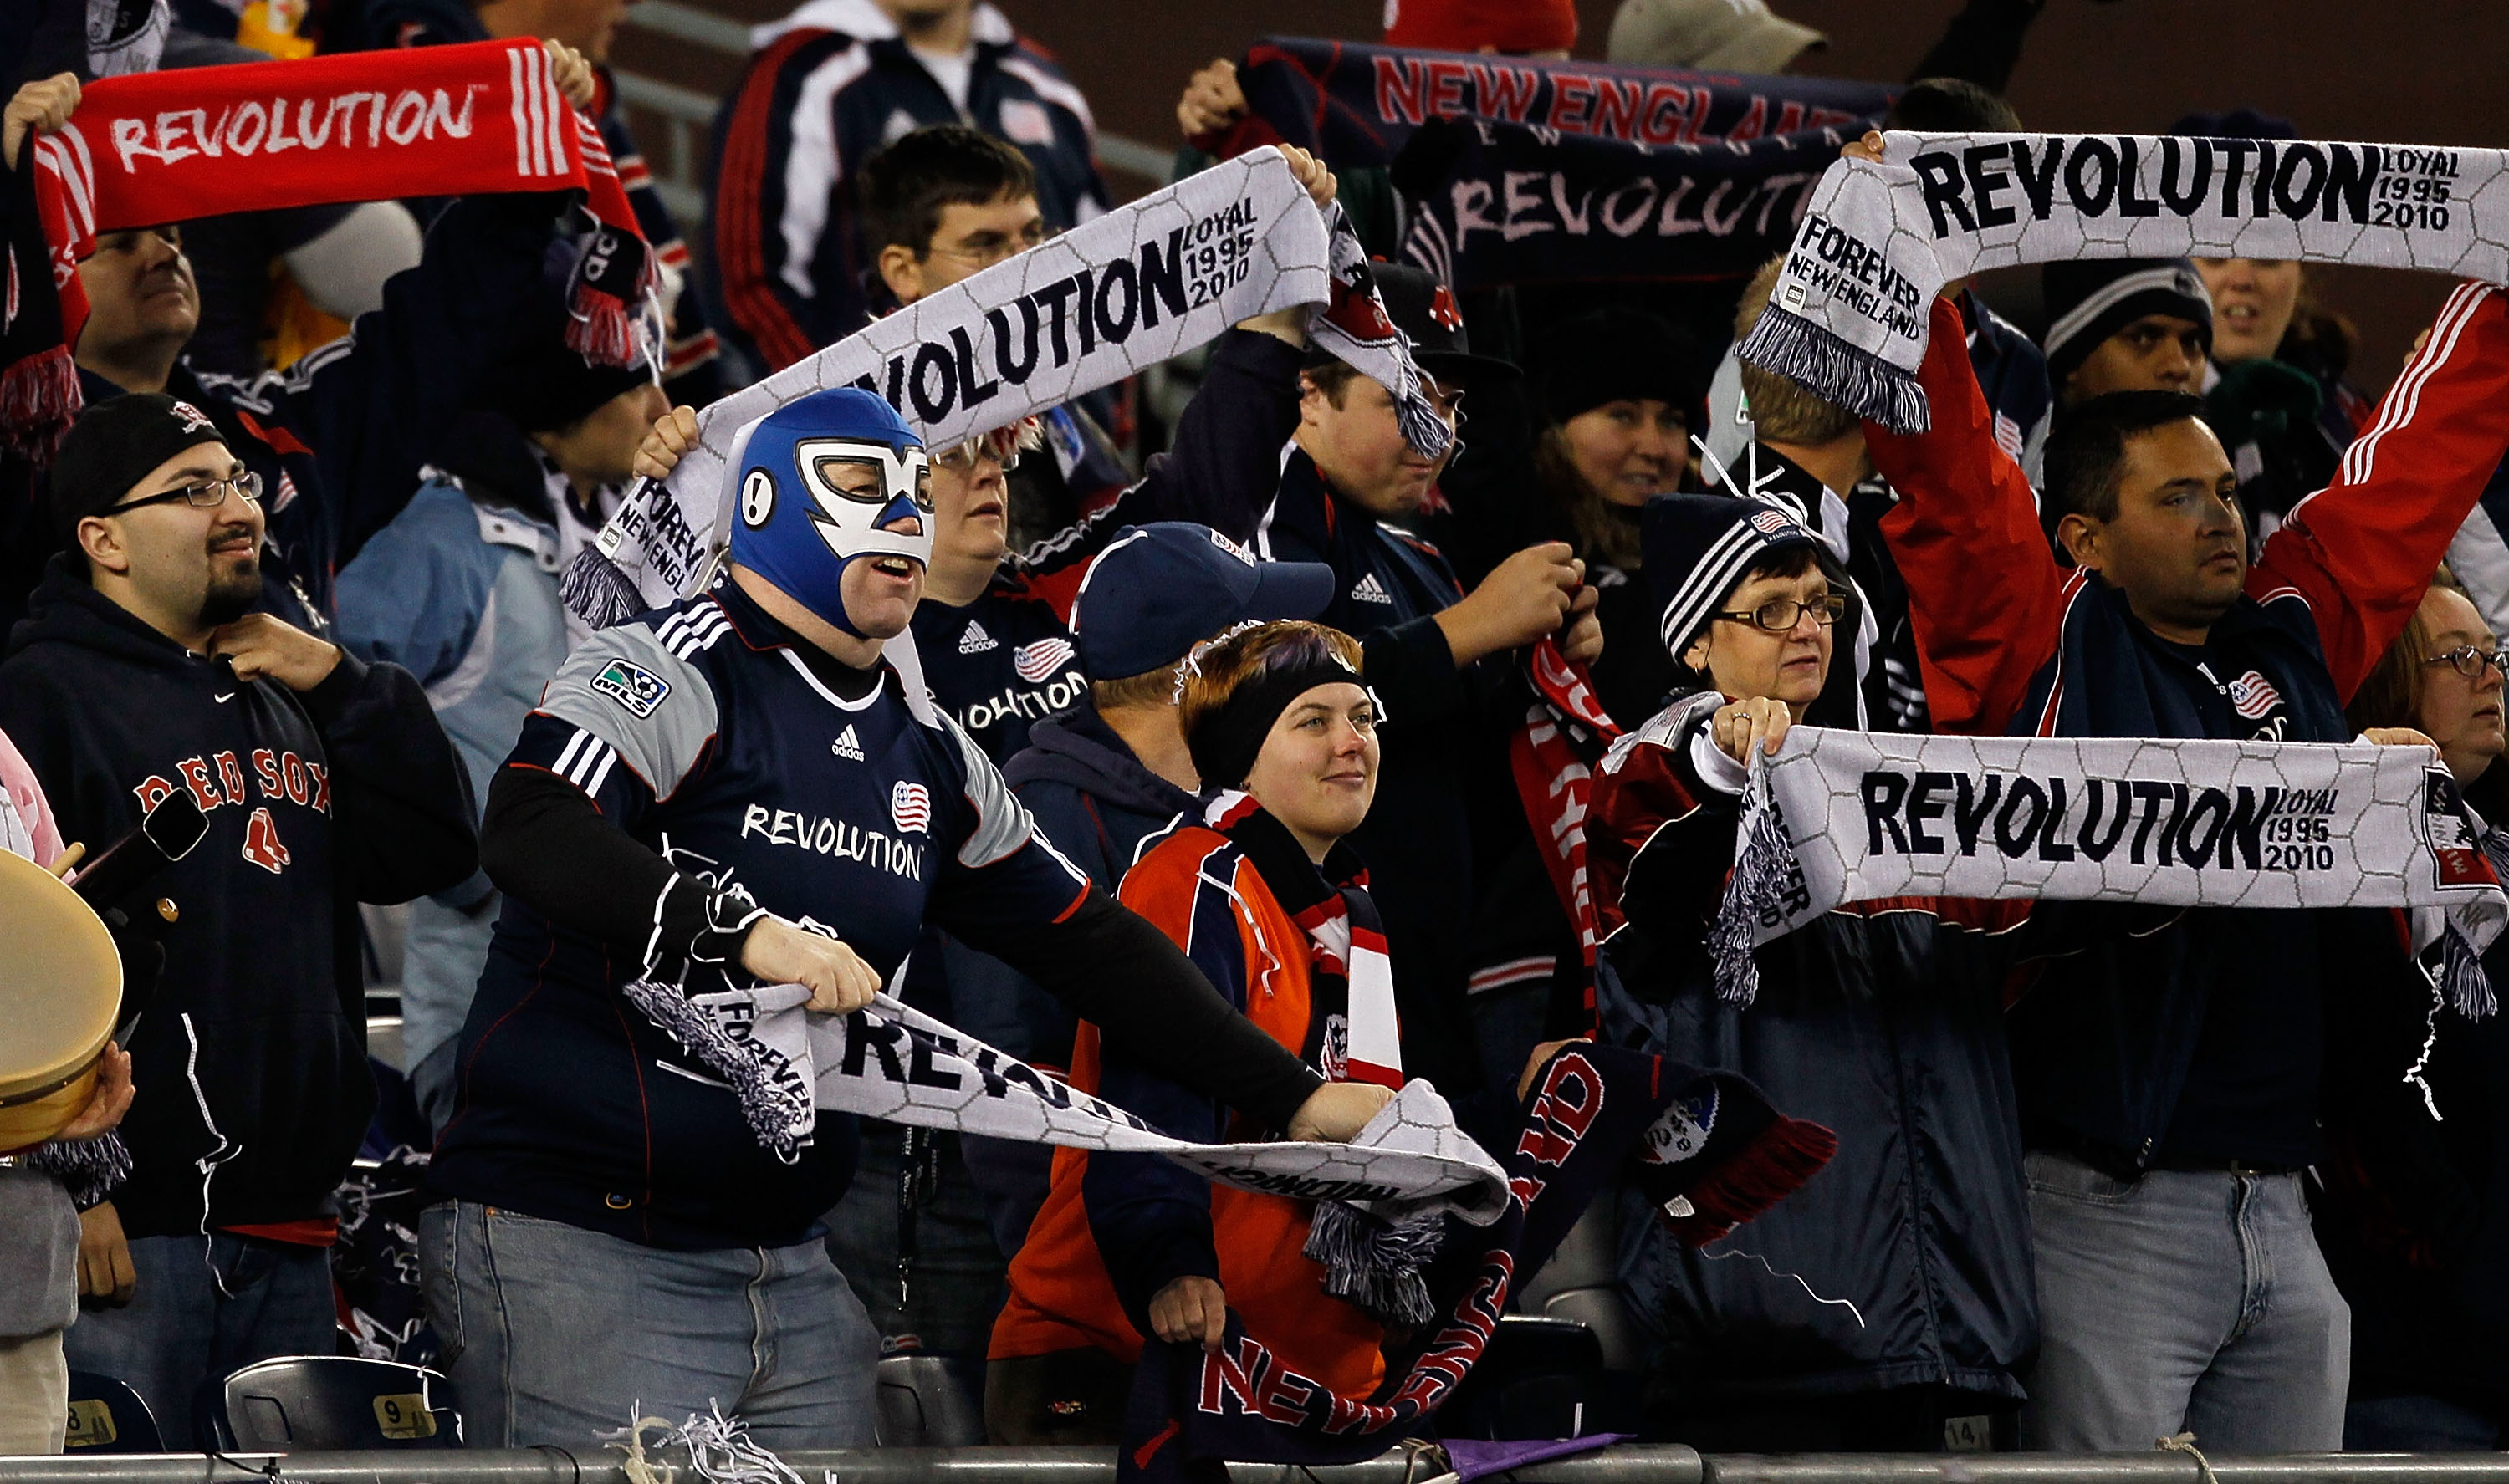 FOXBORO, MA - OCTOBER 16:  Fans of the New England Revolution react during a game against the Kansas City Wizards at Gillette Stadium on October 16, 2010 in Foxboro, Massachusetts. The Revolution won 1-0. (Photo by Jim Rogash/Getty Images)